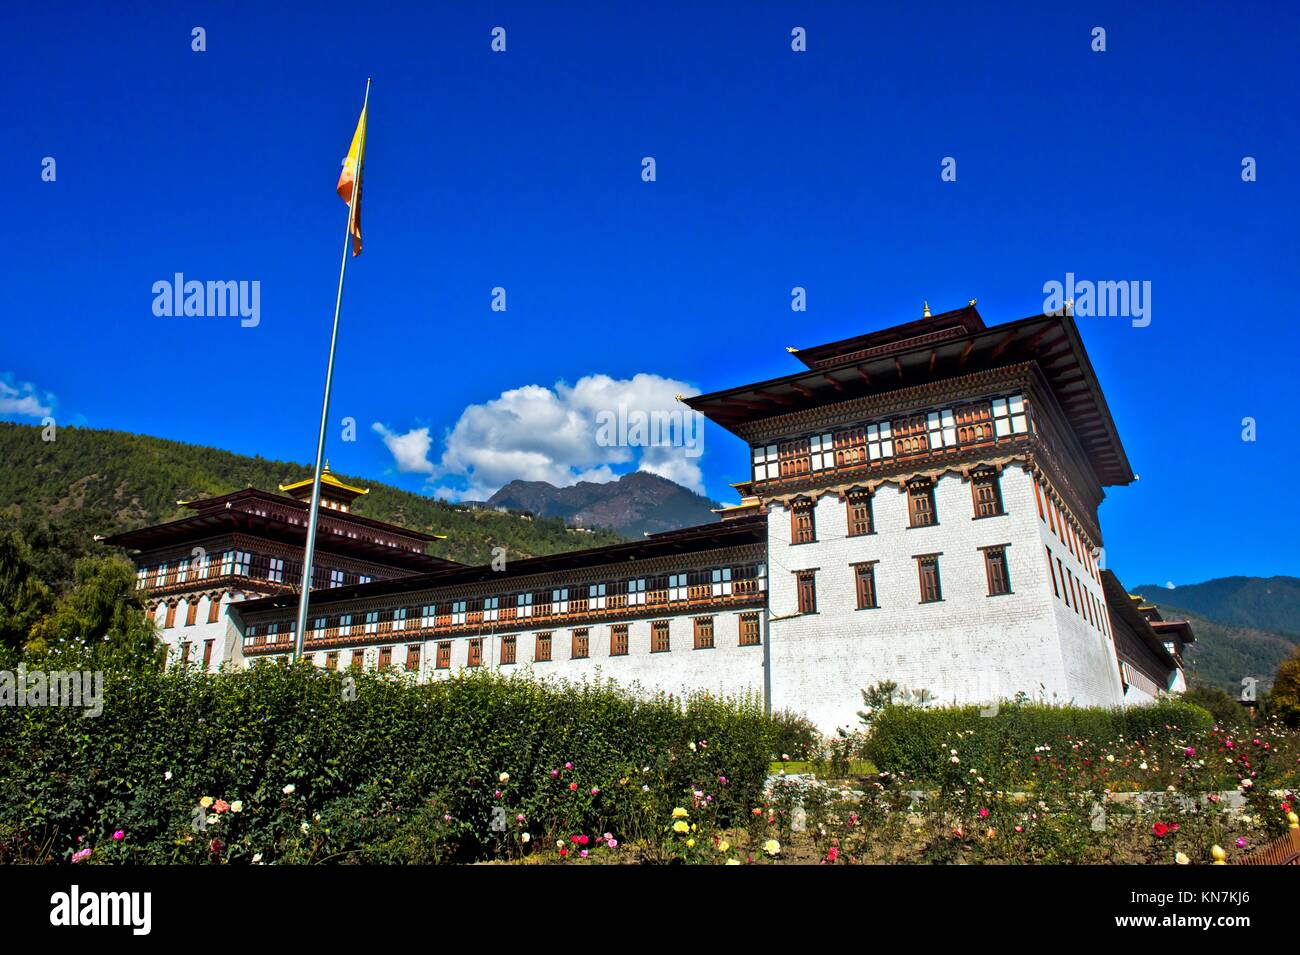 Seat of government Thimphu Dzong or Trashi Chhoe Dzong in the traditional architecural style, Thimphu, Bhutan. Stock Photo